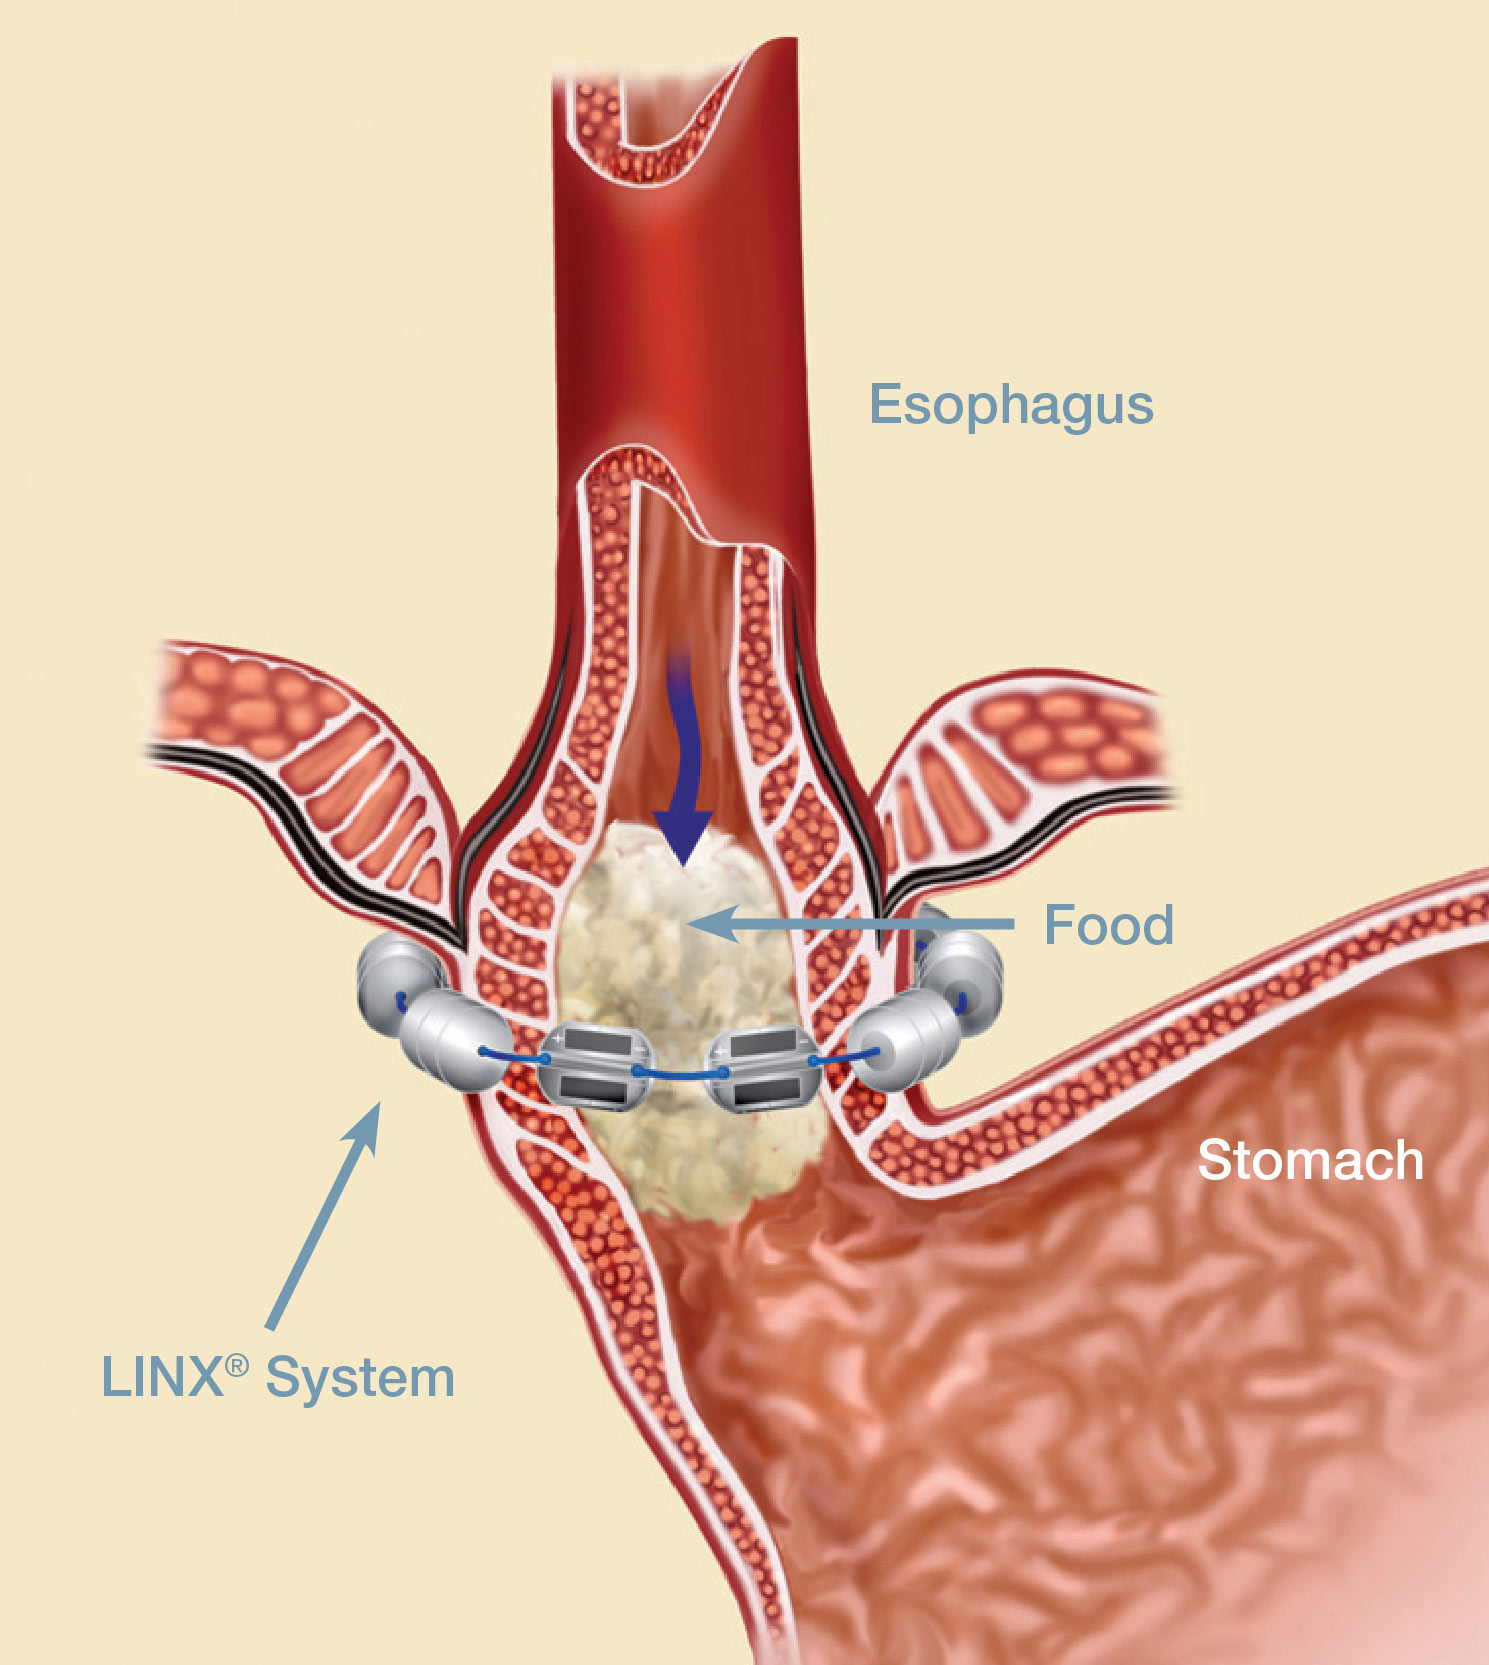 The LINX system is implanted through a one-time, minimally invasive surgical procedure to relieve symptoms associated with GERD.